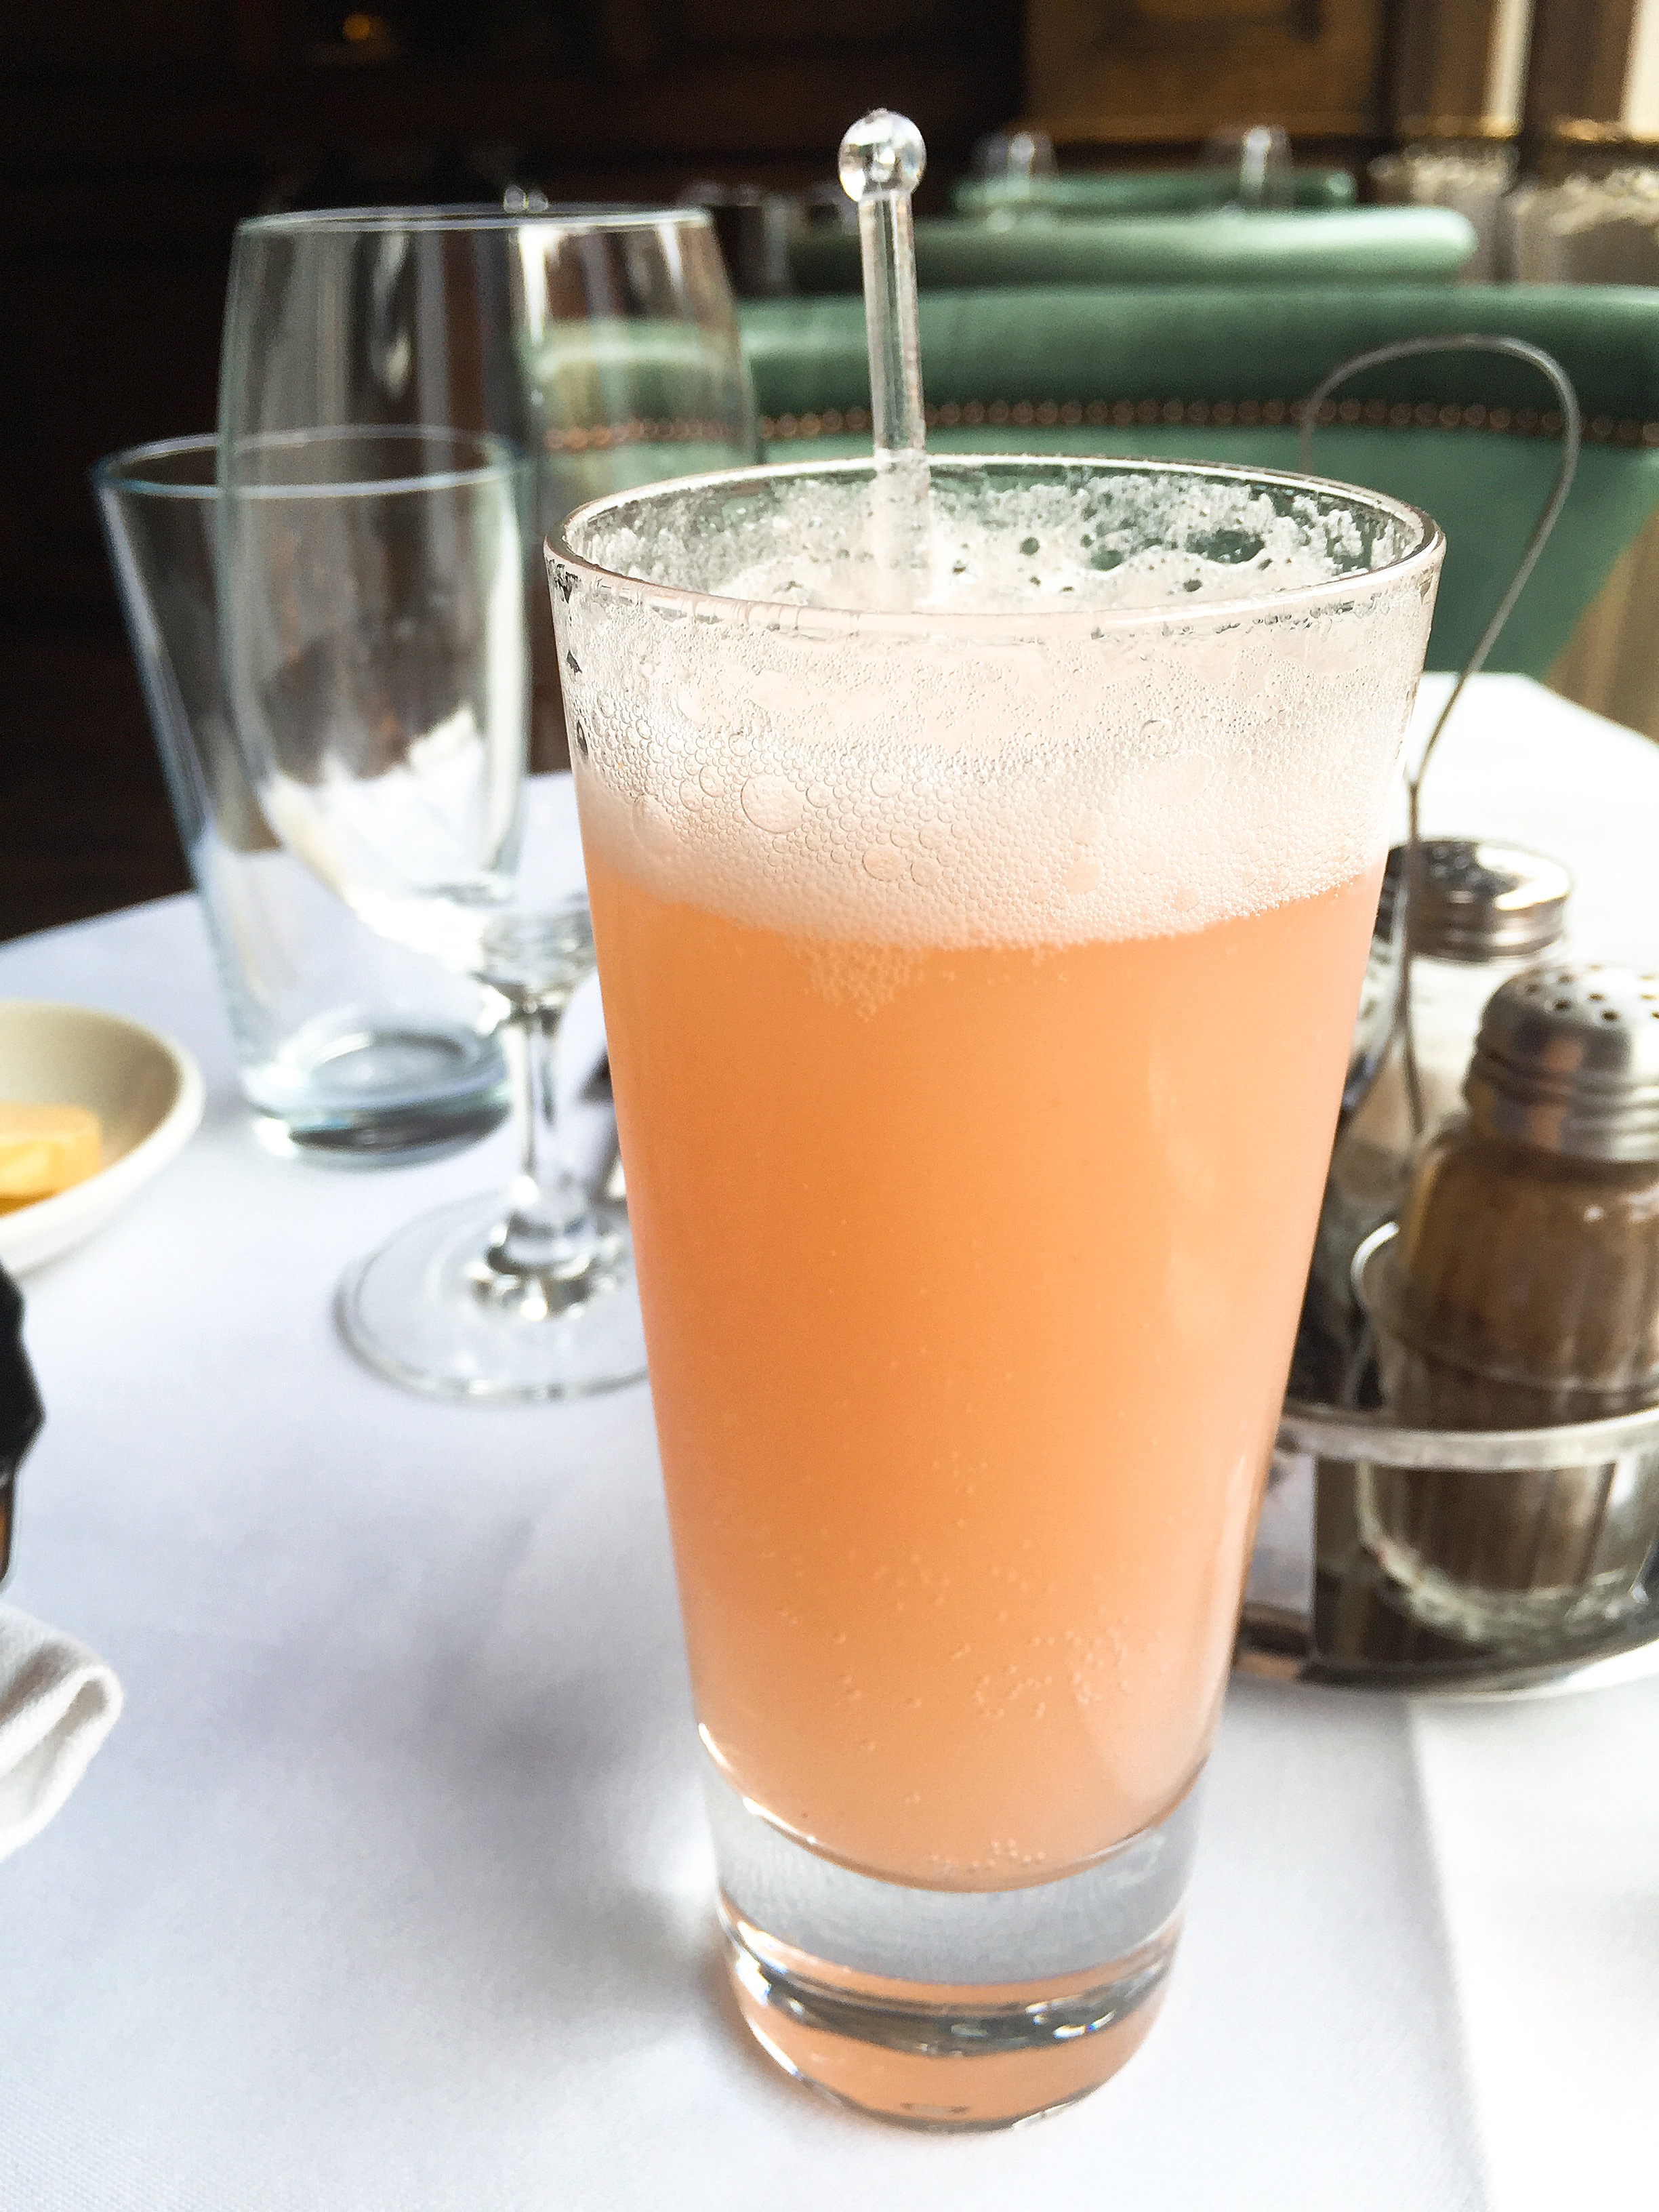 Review: Cafe Monico - drinks